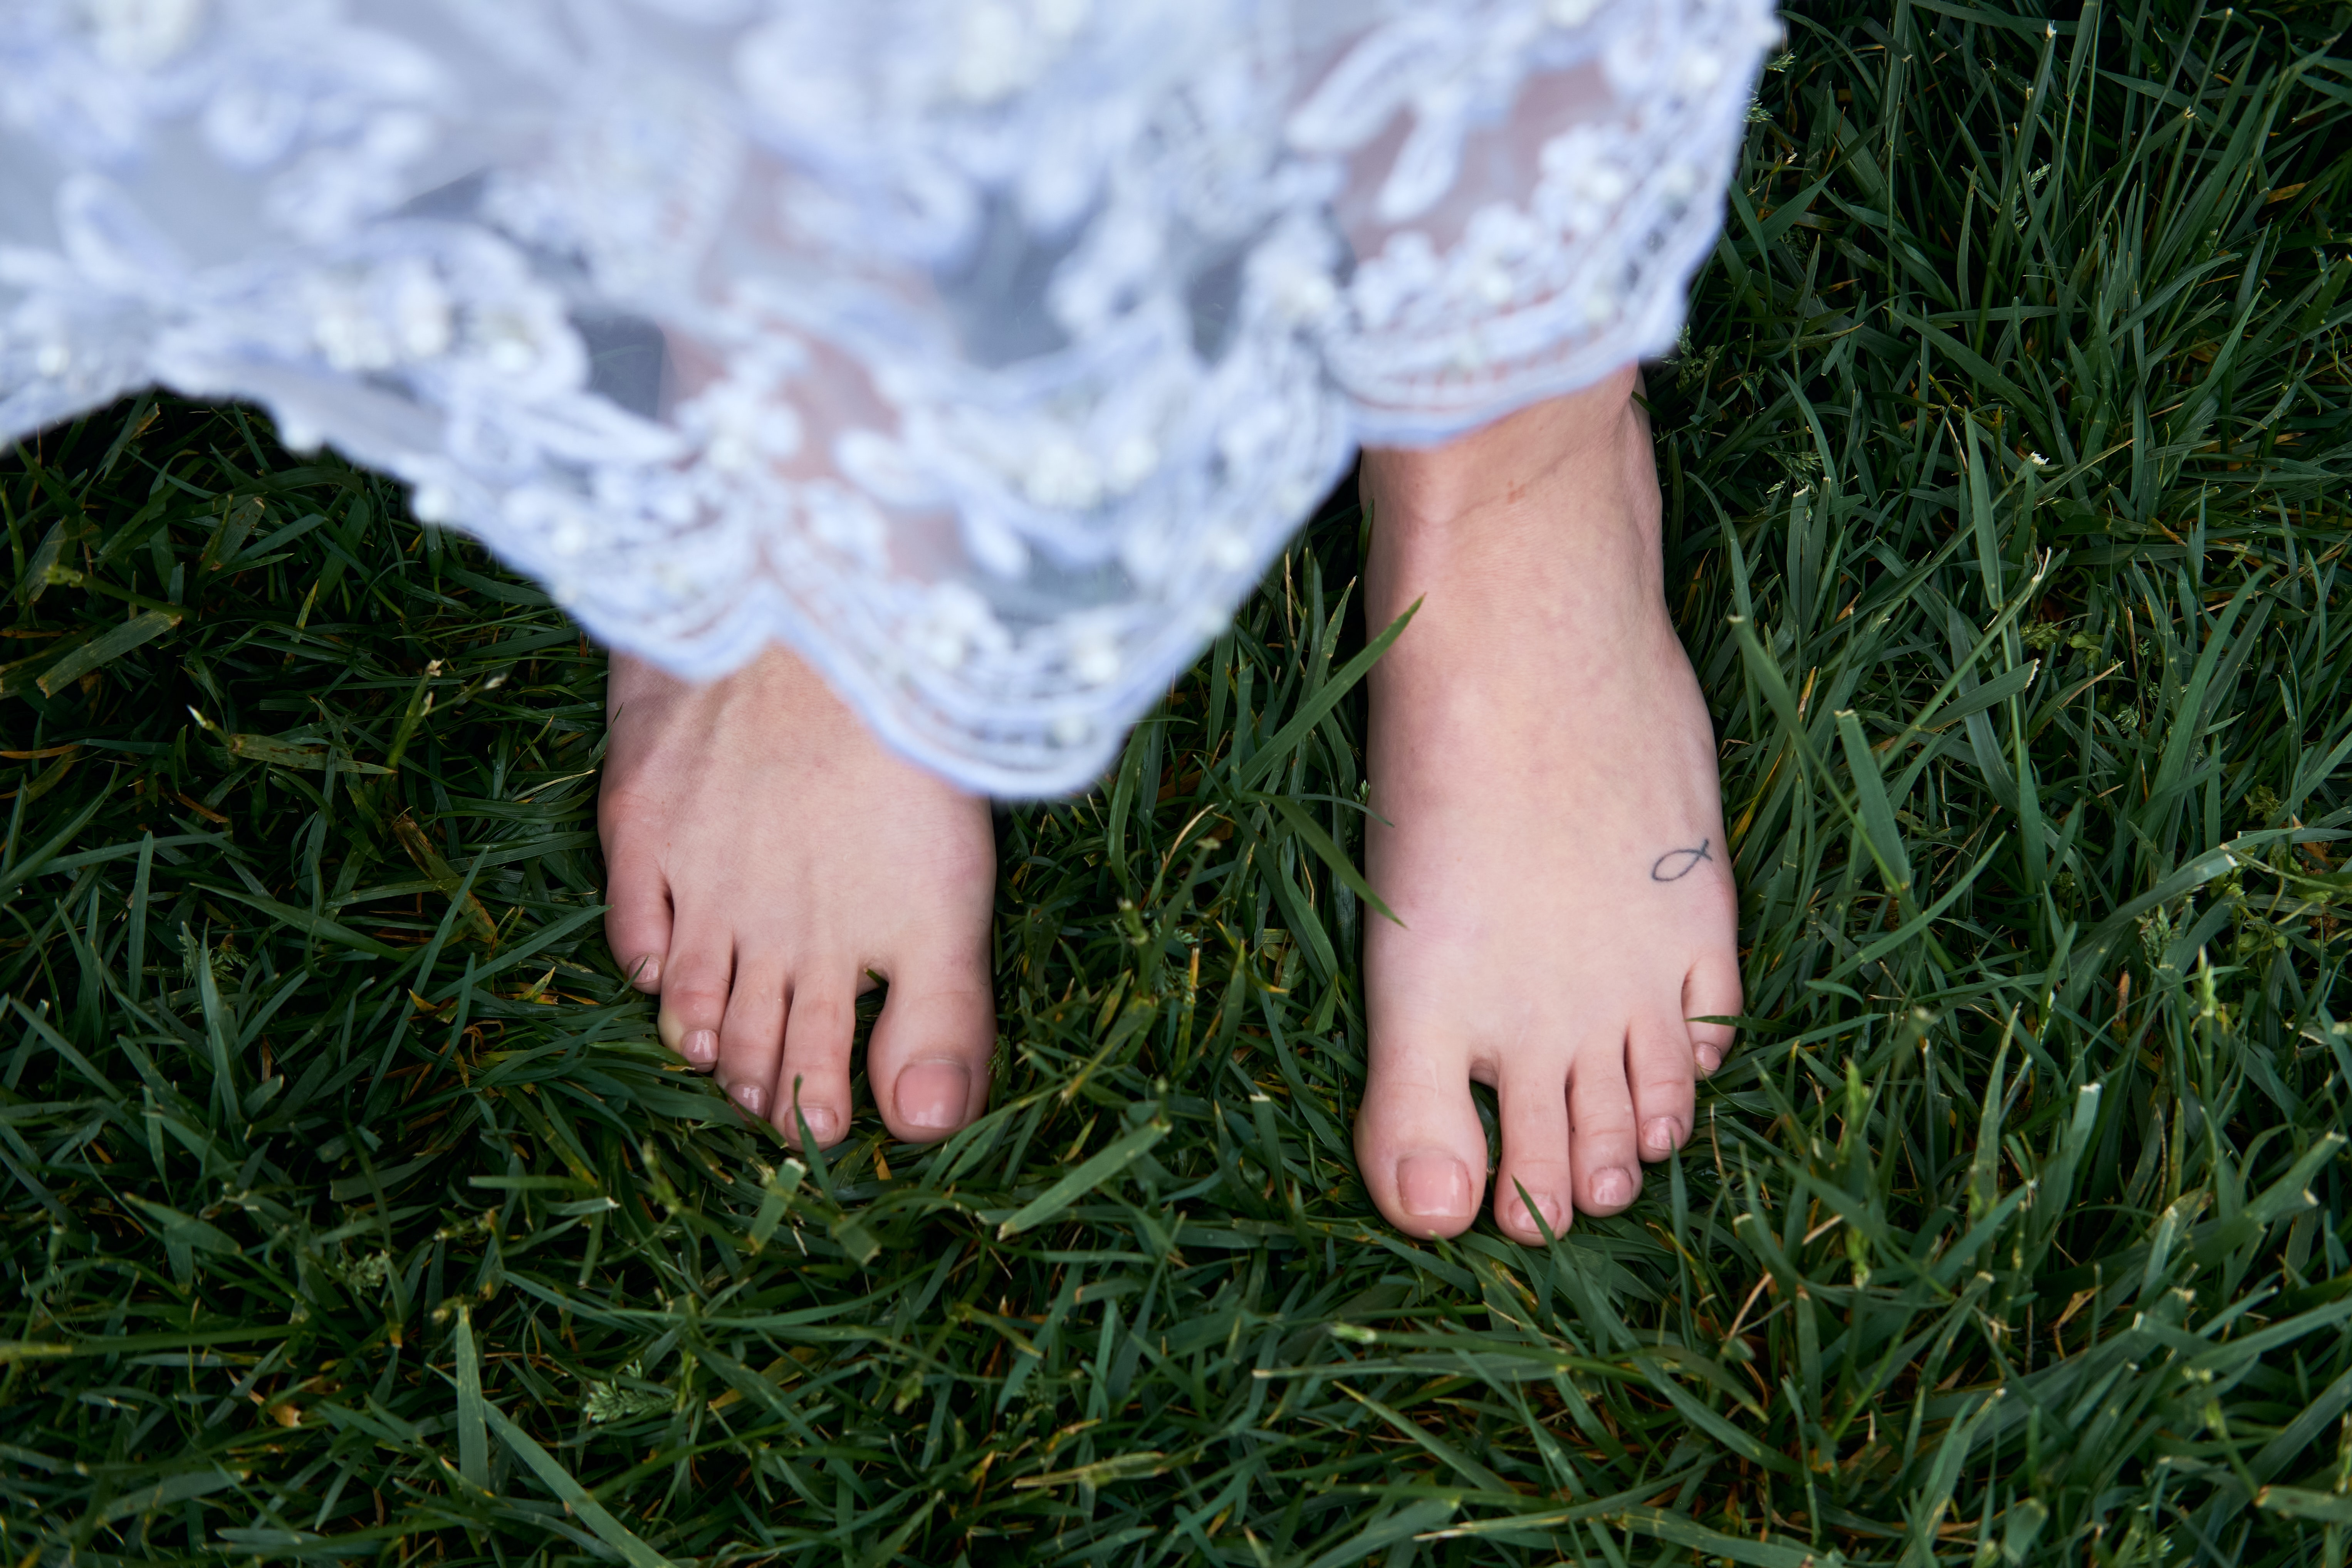 Earthing: The Benefits of Being Barefoot